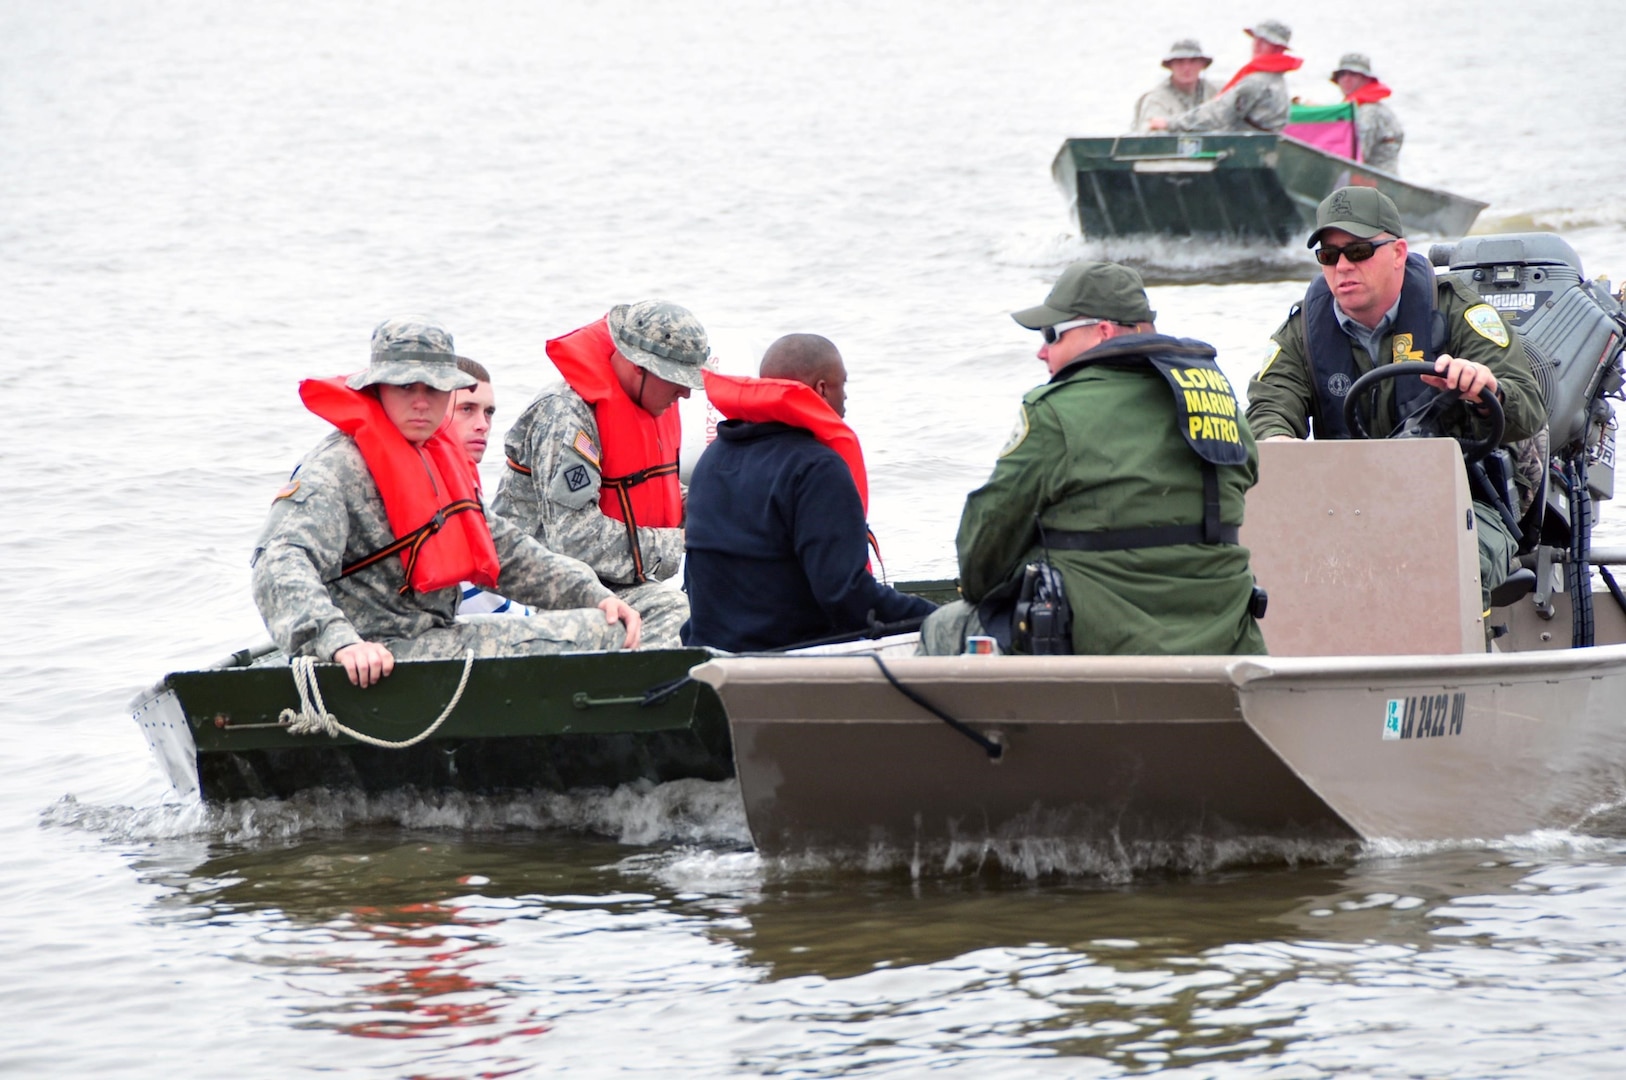 Members of the Louisiana National Guard's 225th Engineer Brigade conduct a search and rescue exercise during a March 23, 2013, disaster response drill at Fontainebleau State Park, Mandeville, La.